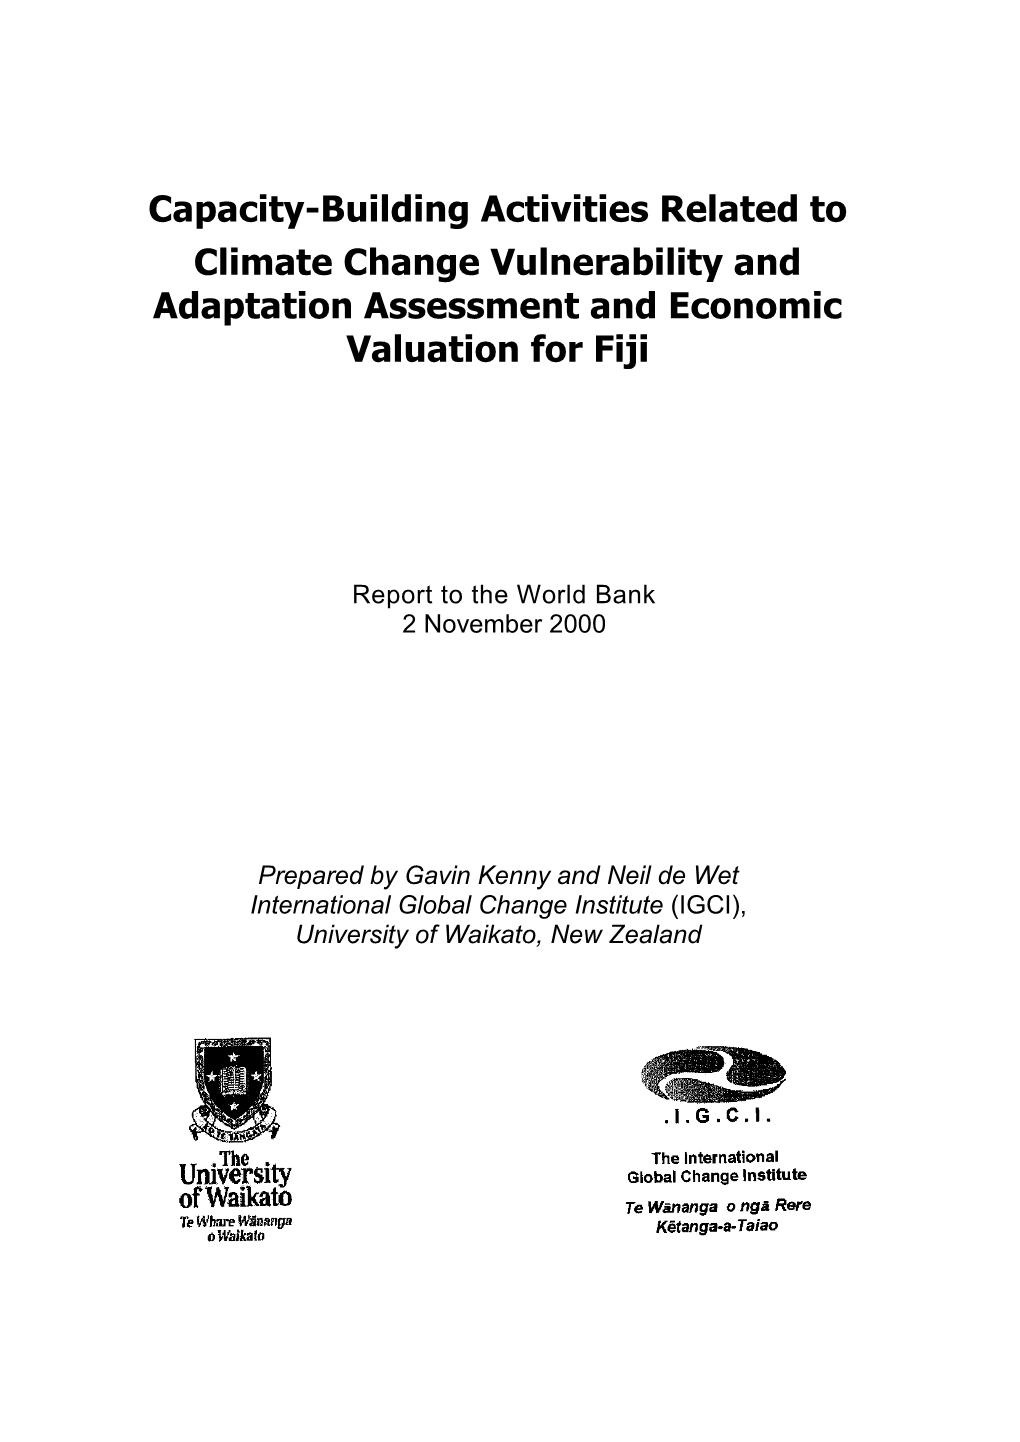 Capacity-Building Activities Related to Climate Change Vulnerability and Adaptation Assessment and Economic Valuation for Fiji